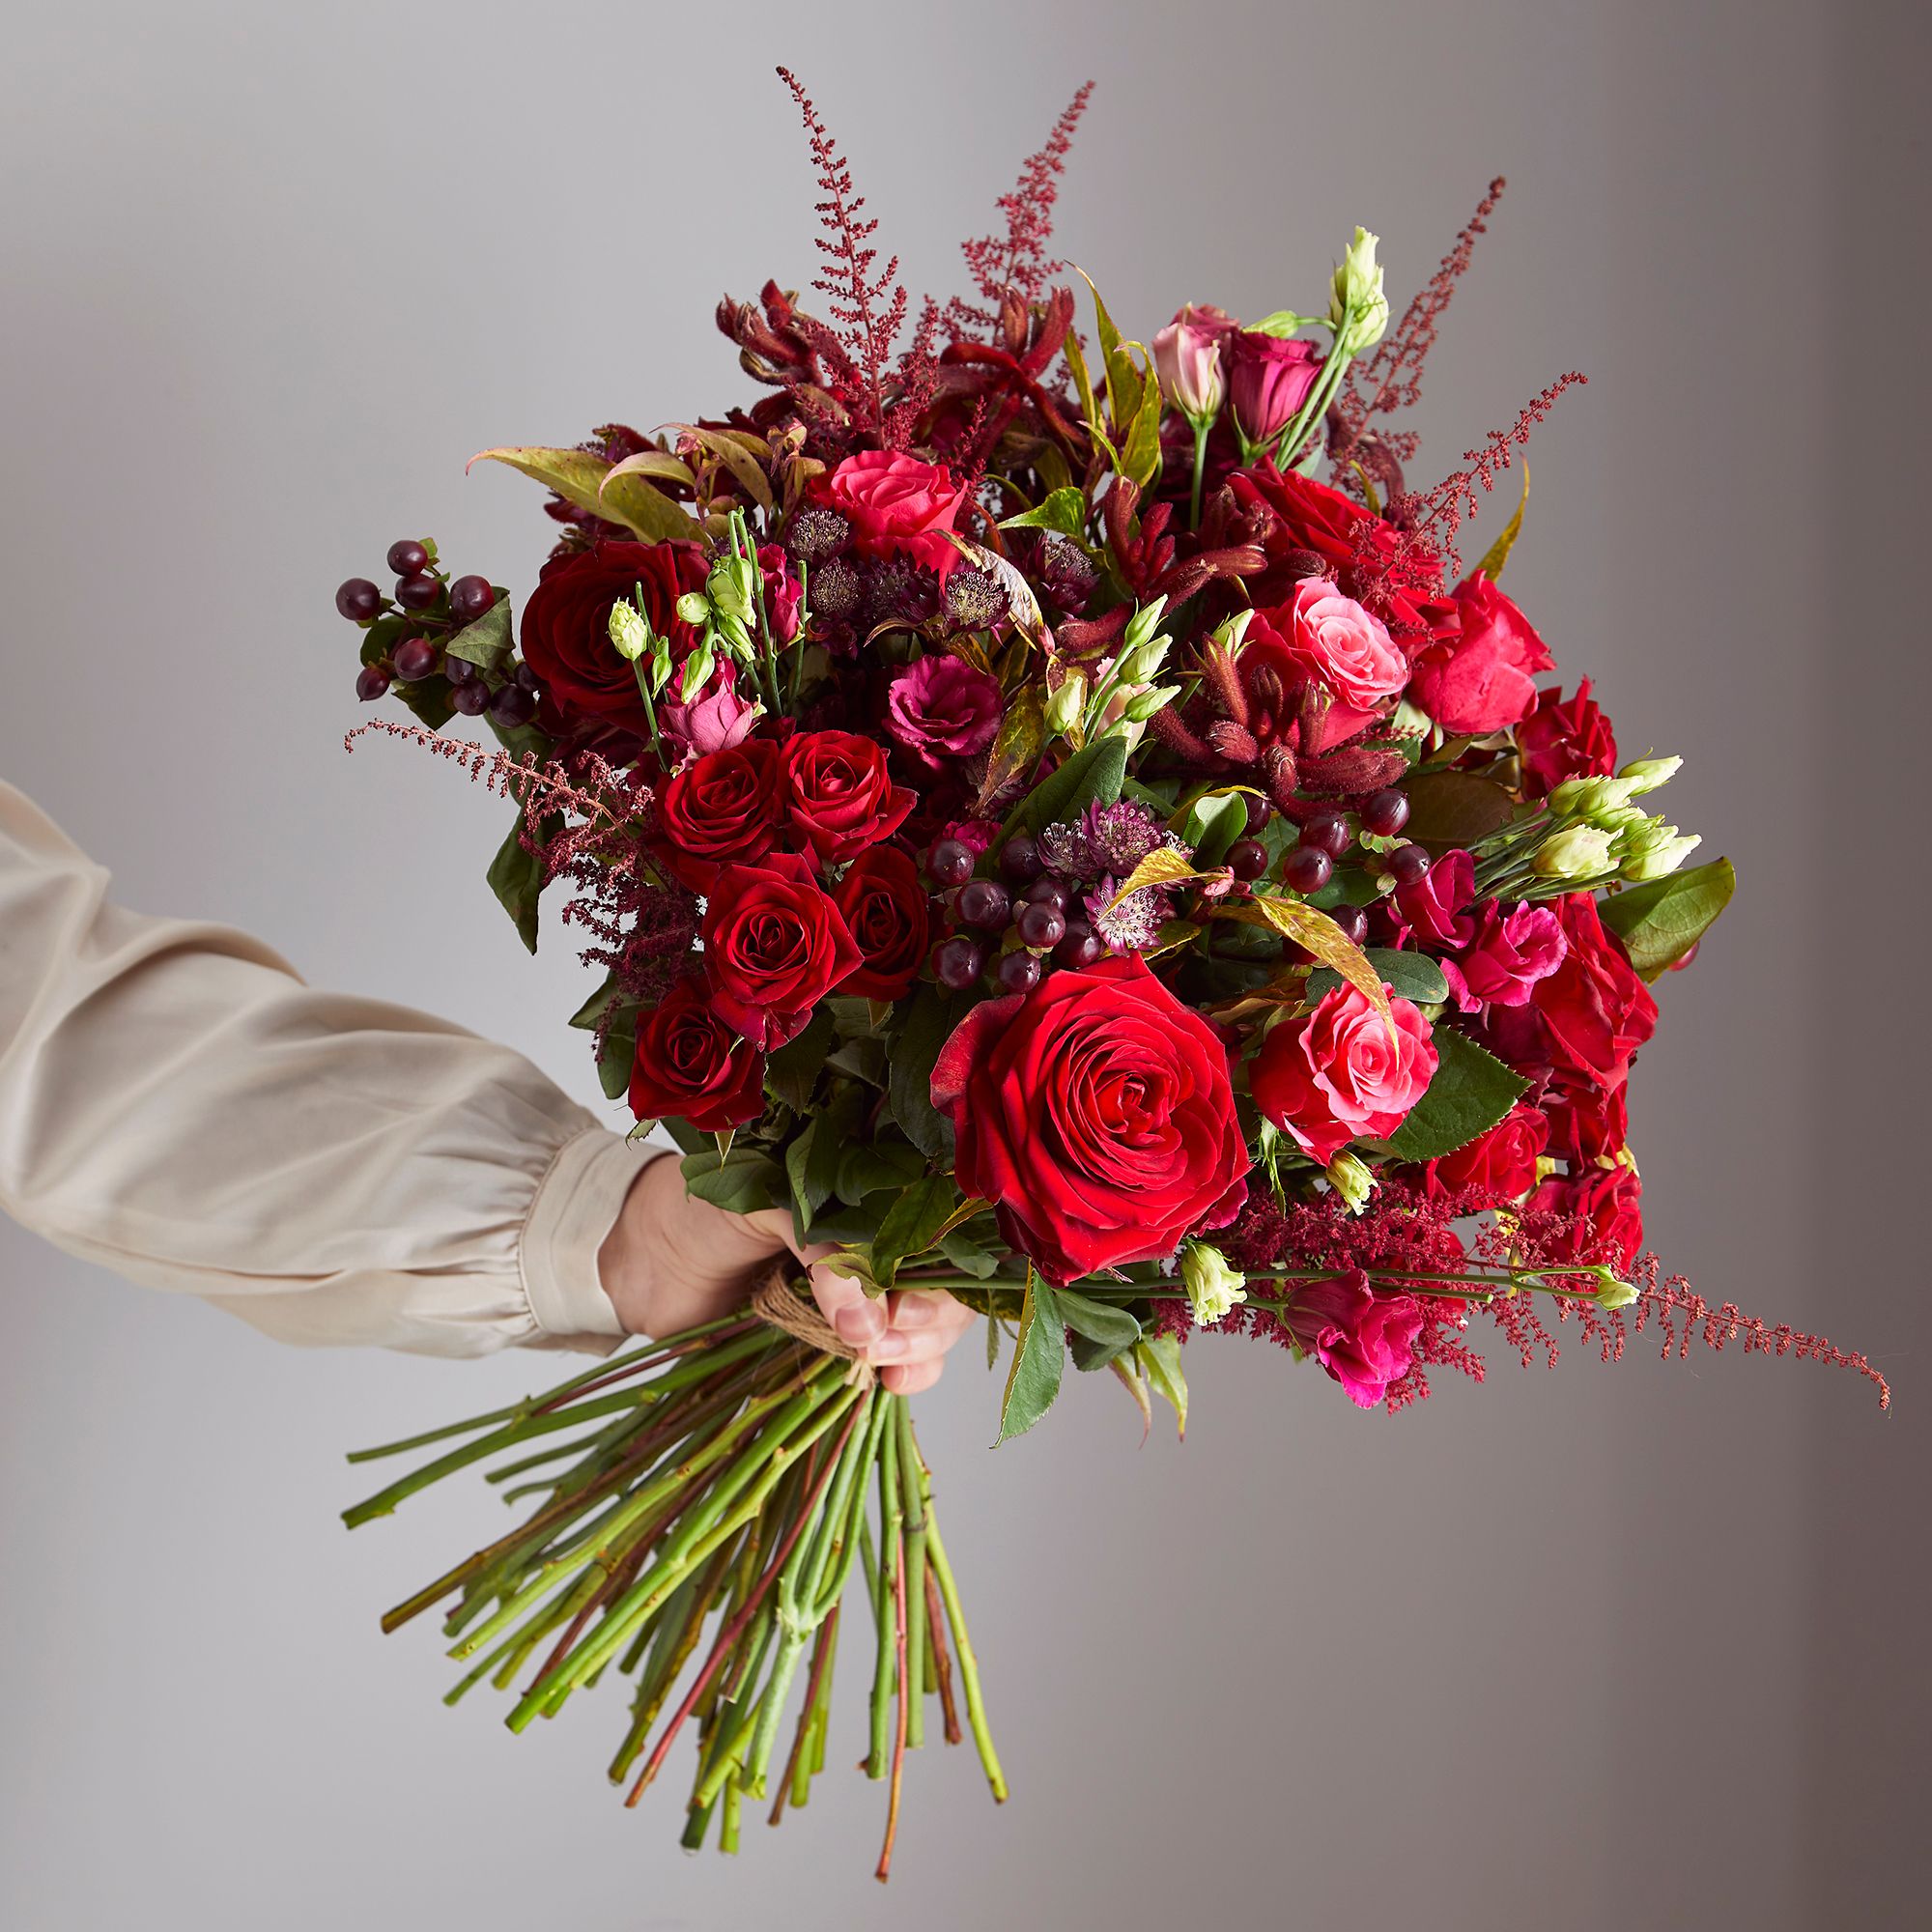 Chinese New Year flowers | Ethical flowers and gifts | Arena Flowers